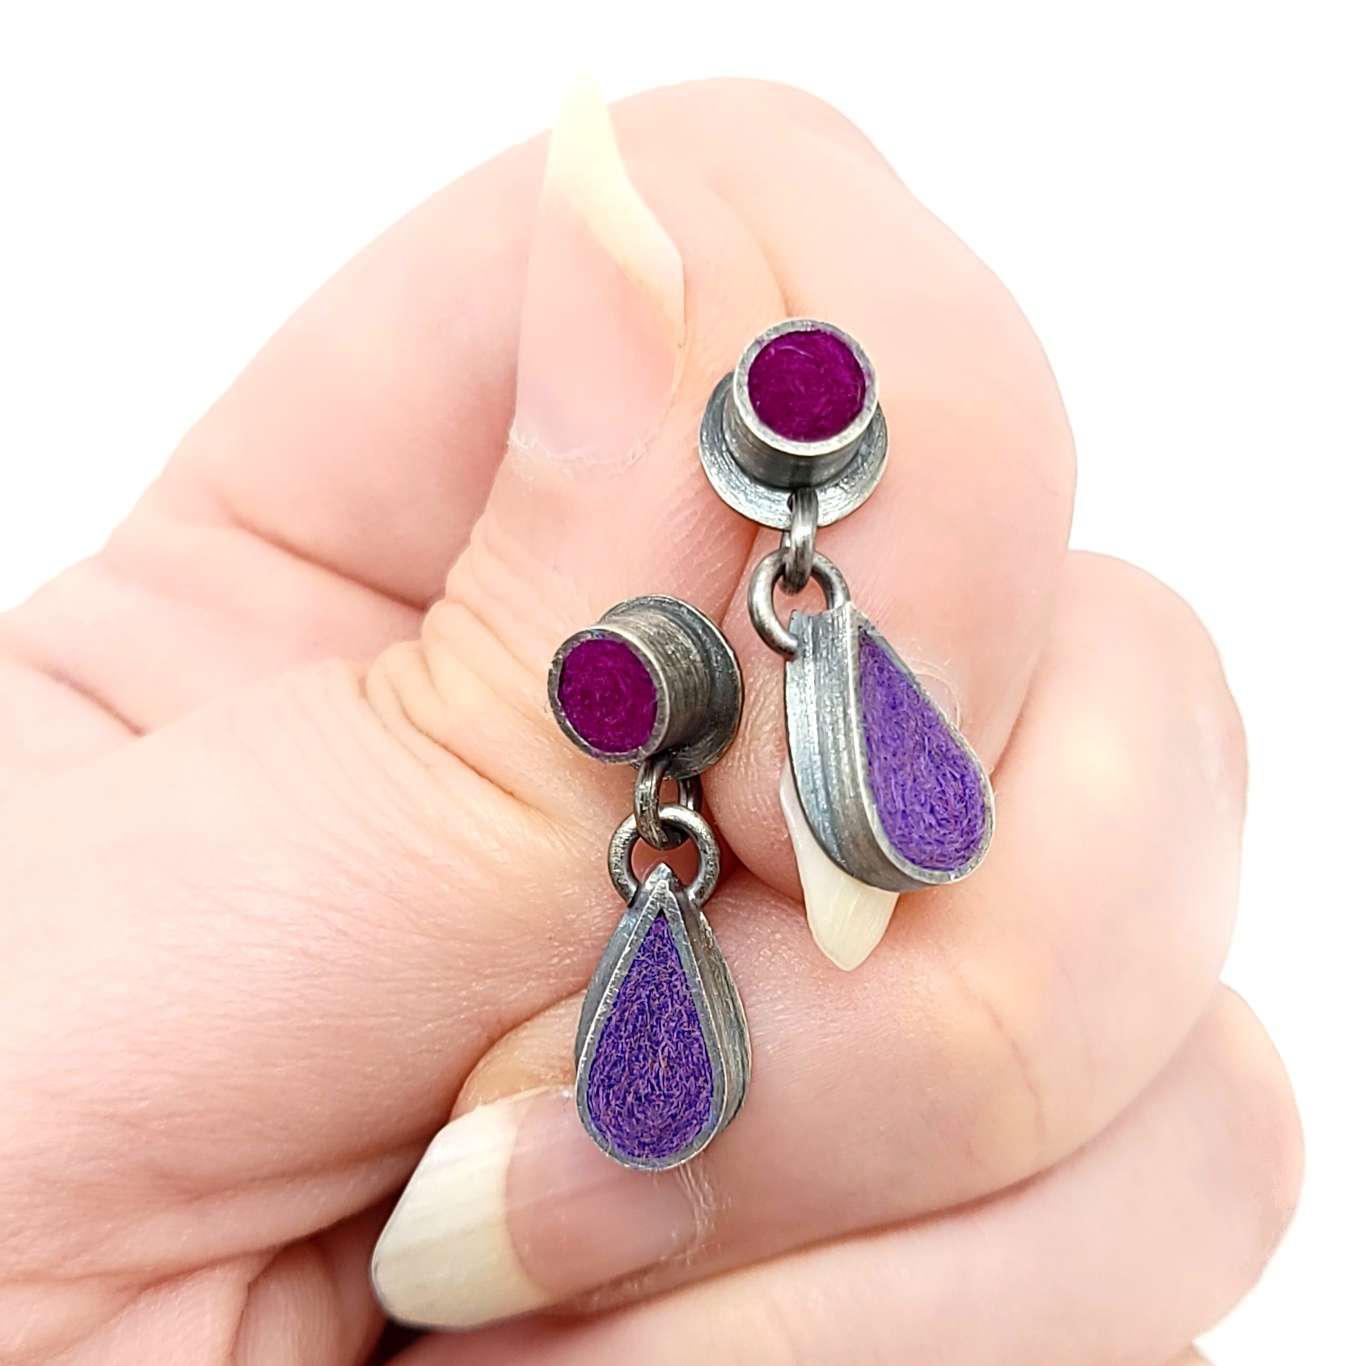 Earrings - Tiny Dot with Dangling Teardrop Posts in Grape and Raspberry by Michele A. Friedman